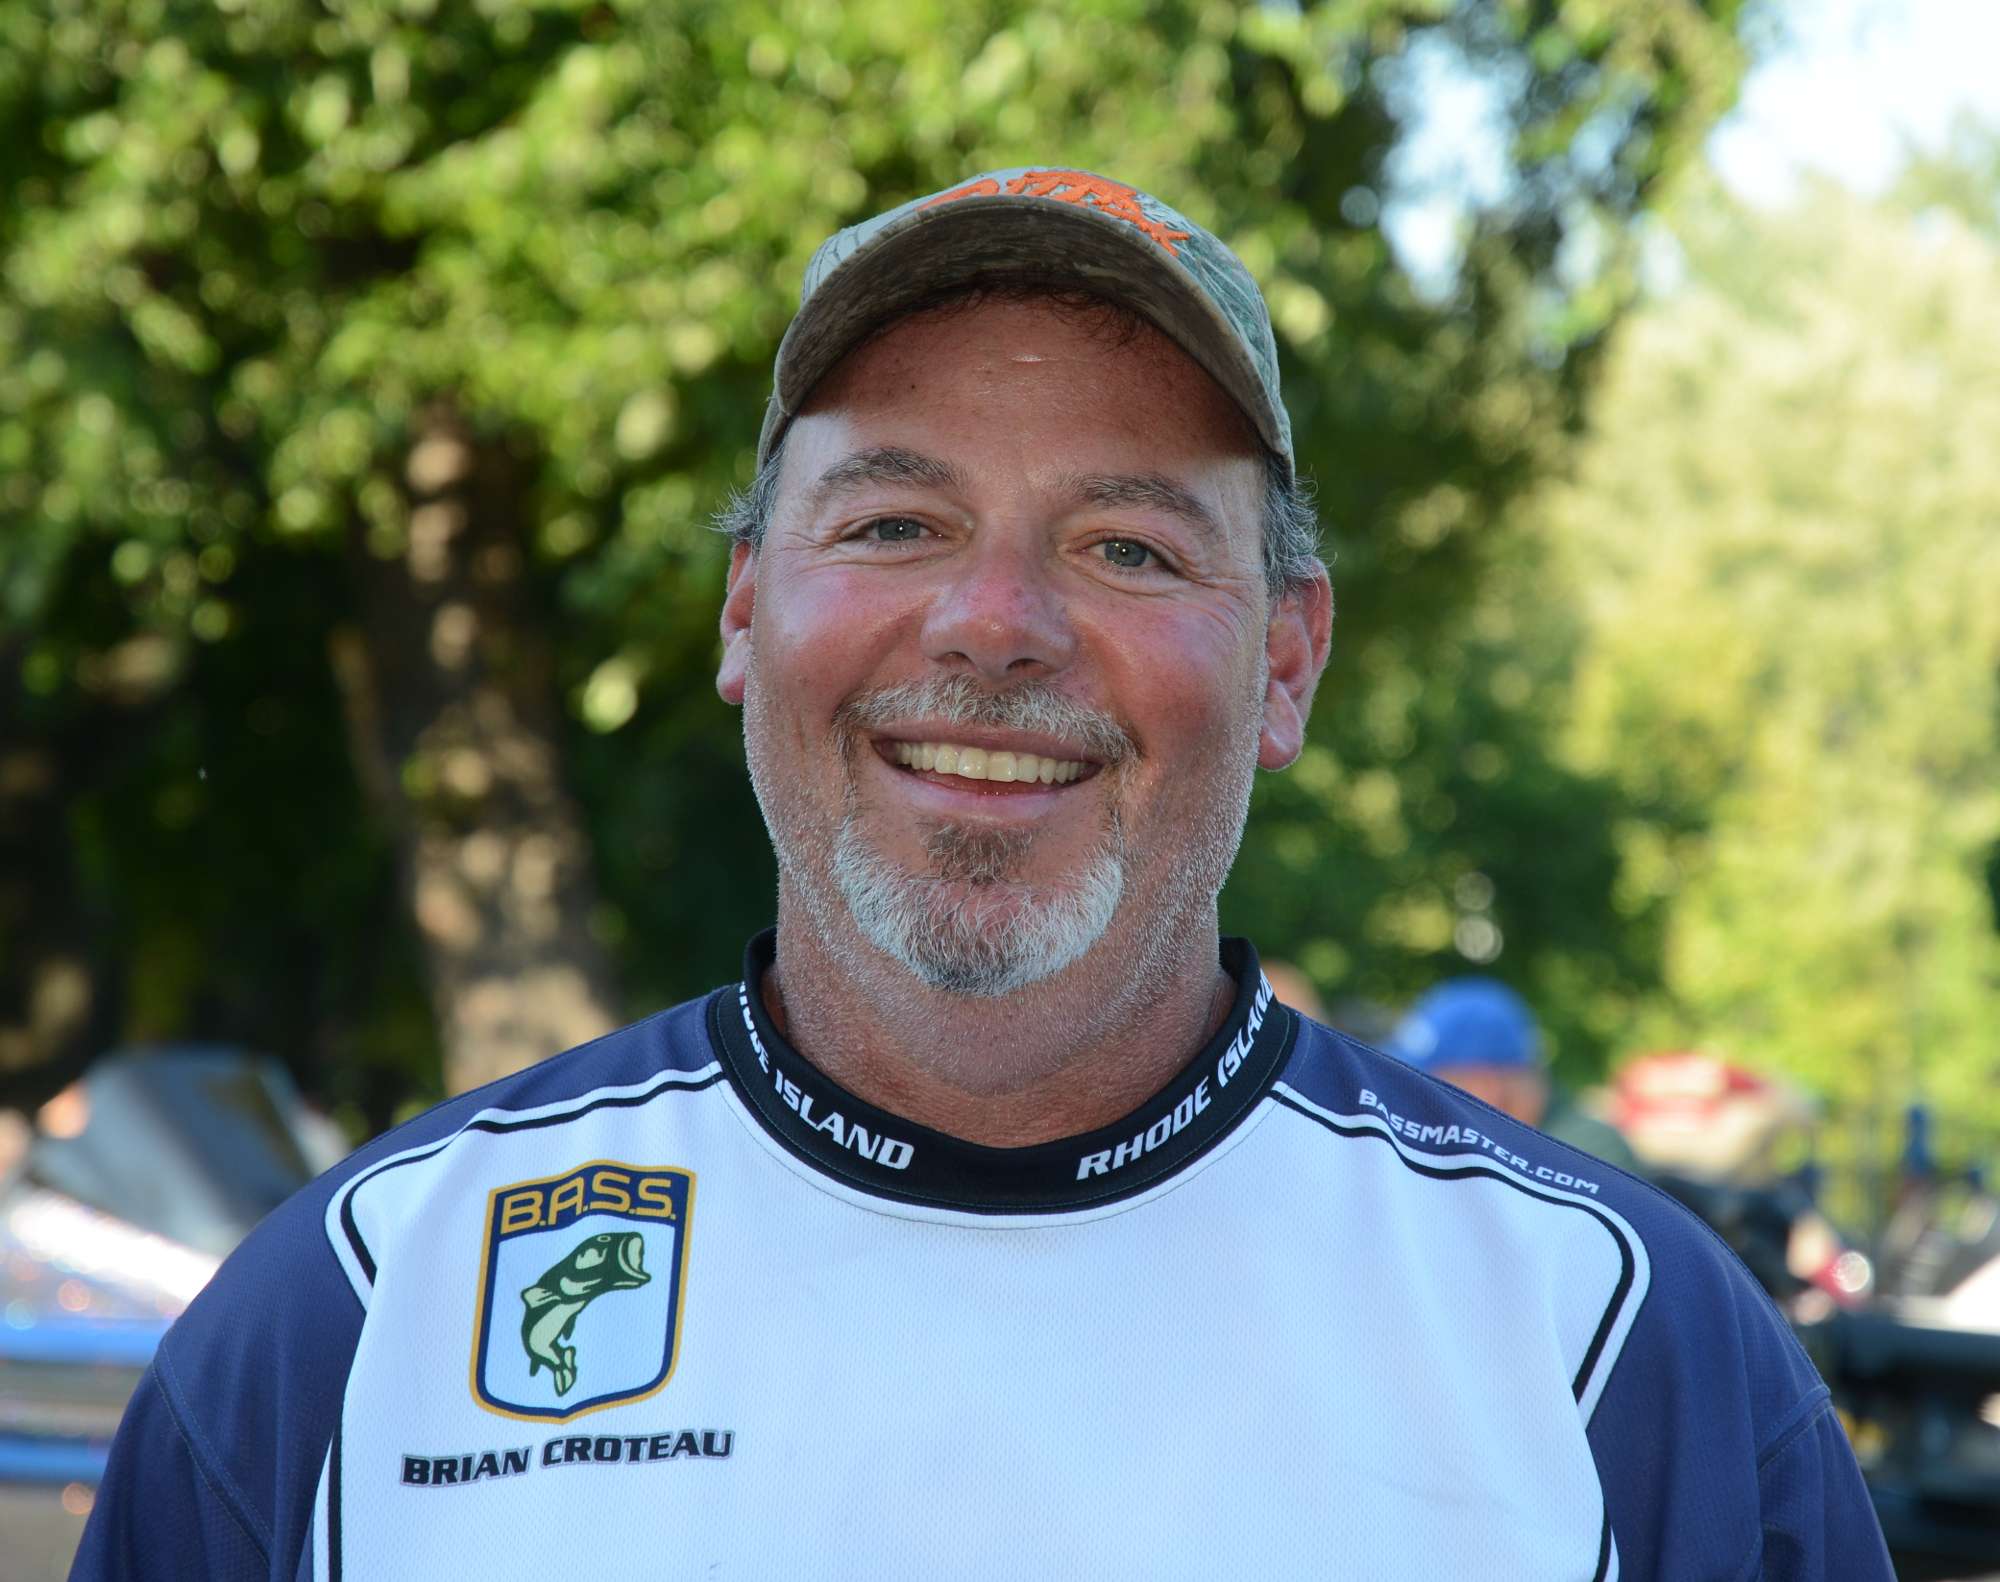 Brian Croteau lives in Massachusetts but will represent Rhode Island for his first time in the championship. Croteau is a housing contractor by day, and heâs a member of the Northern Rhode Island Bass Anglers. For fun, he rides his Harley and goes camping with his family.